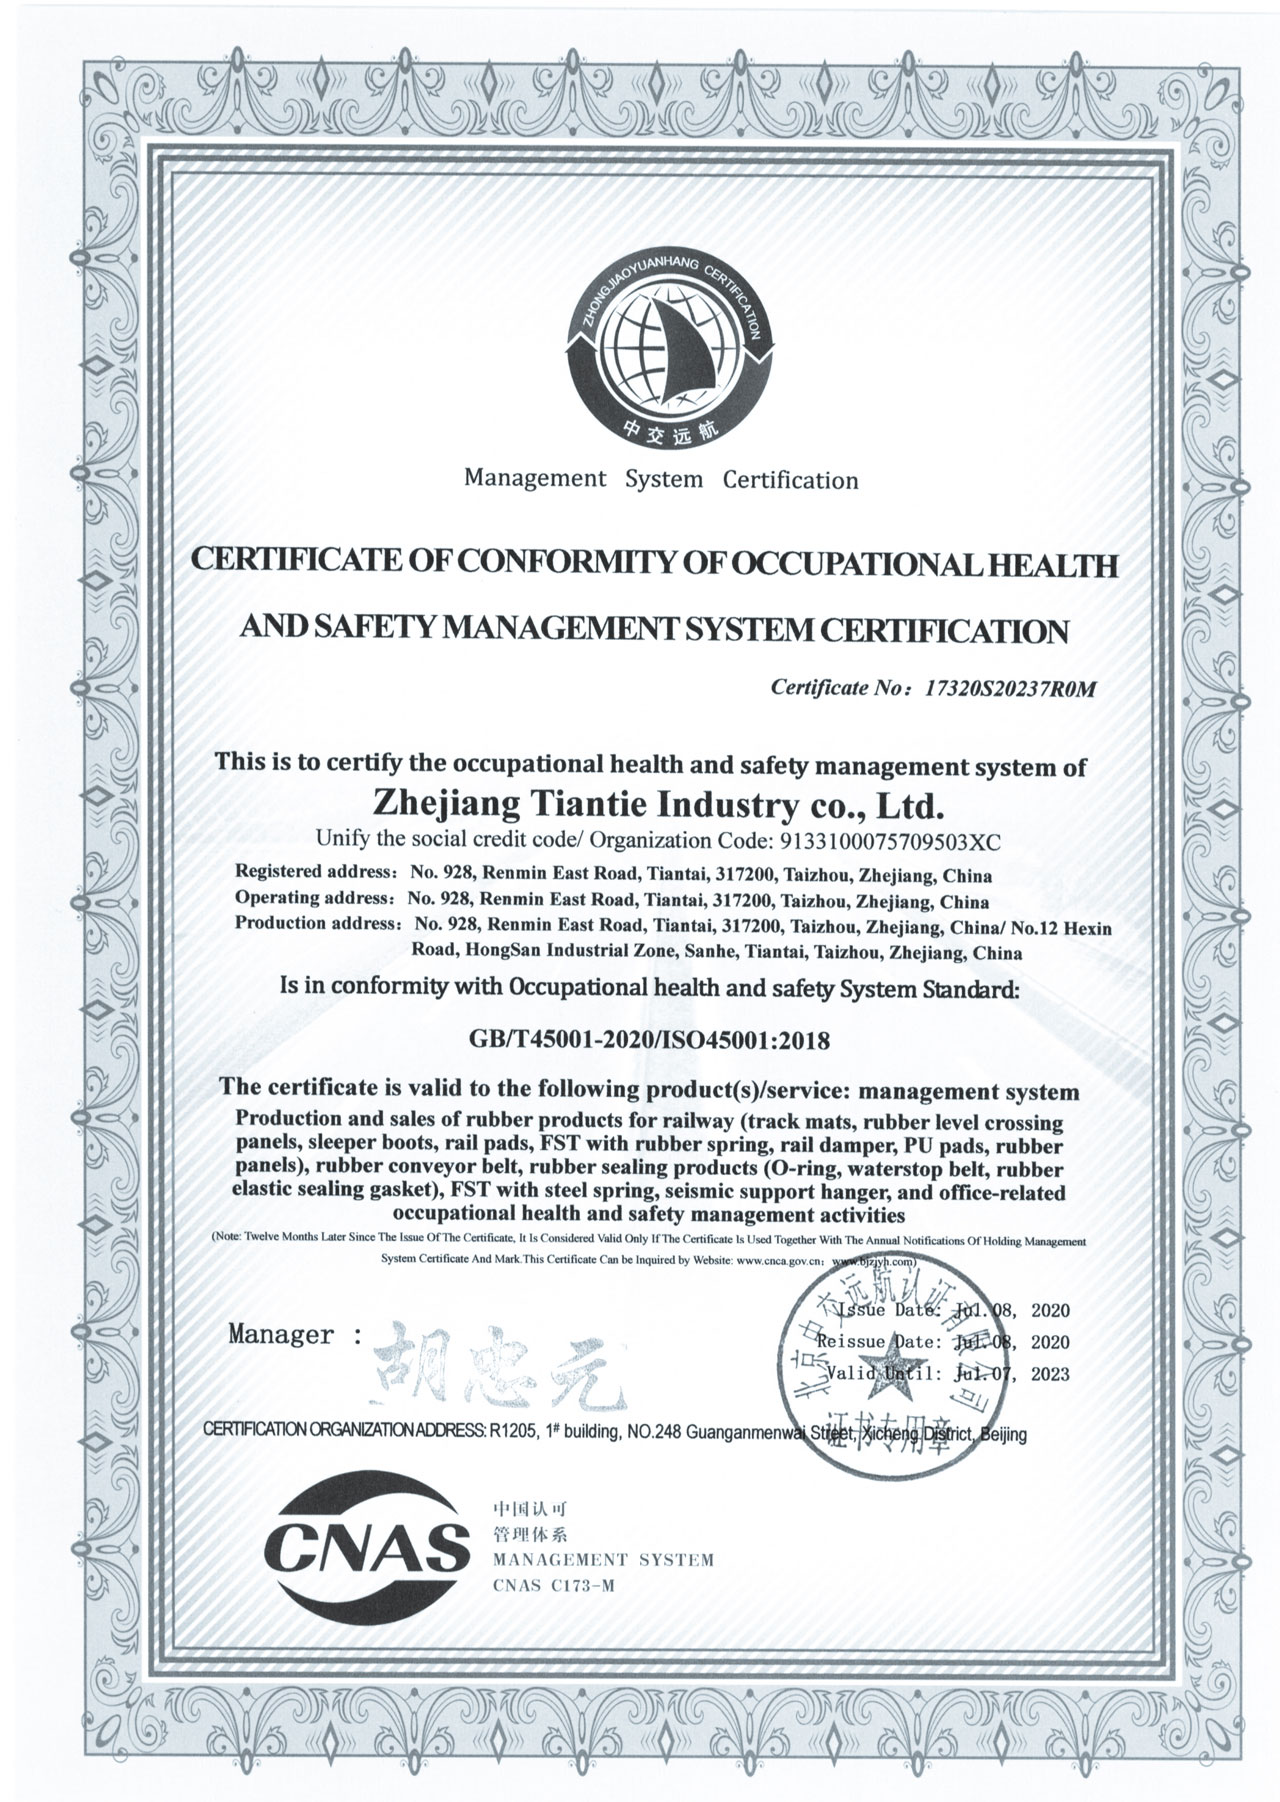 certificate-of-conformity-of-occupational-health-and-safety-management-system-certification